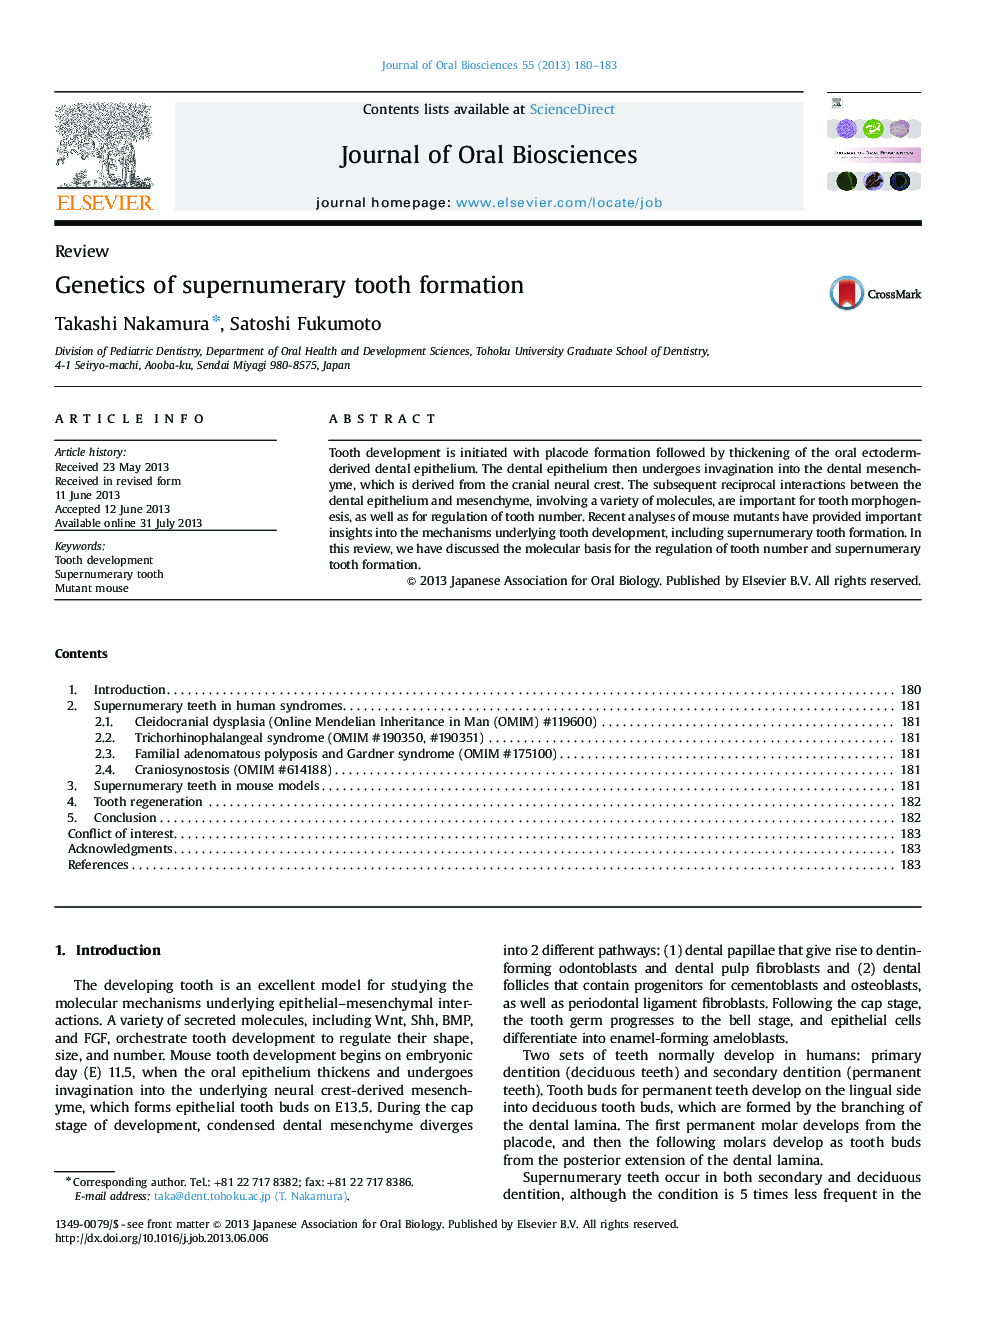 Genetics of supernumerary tooth formation